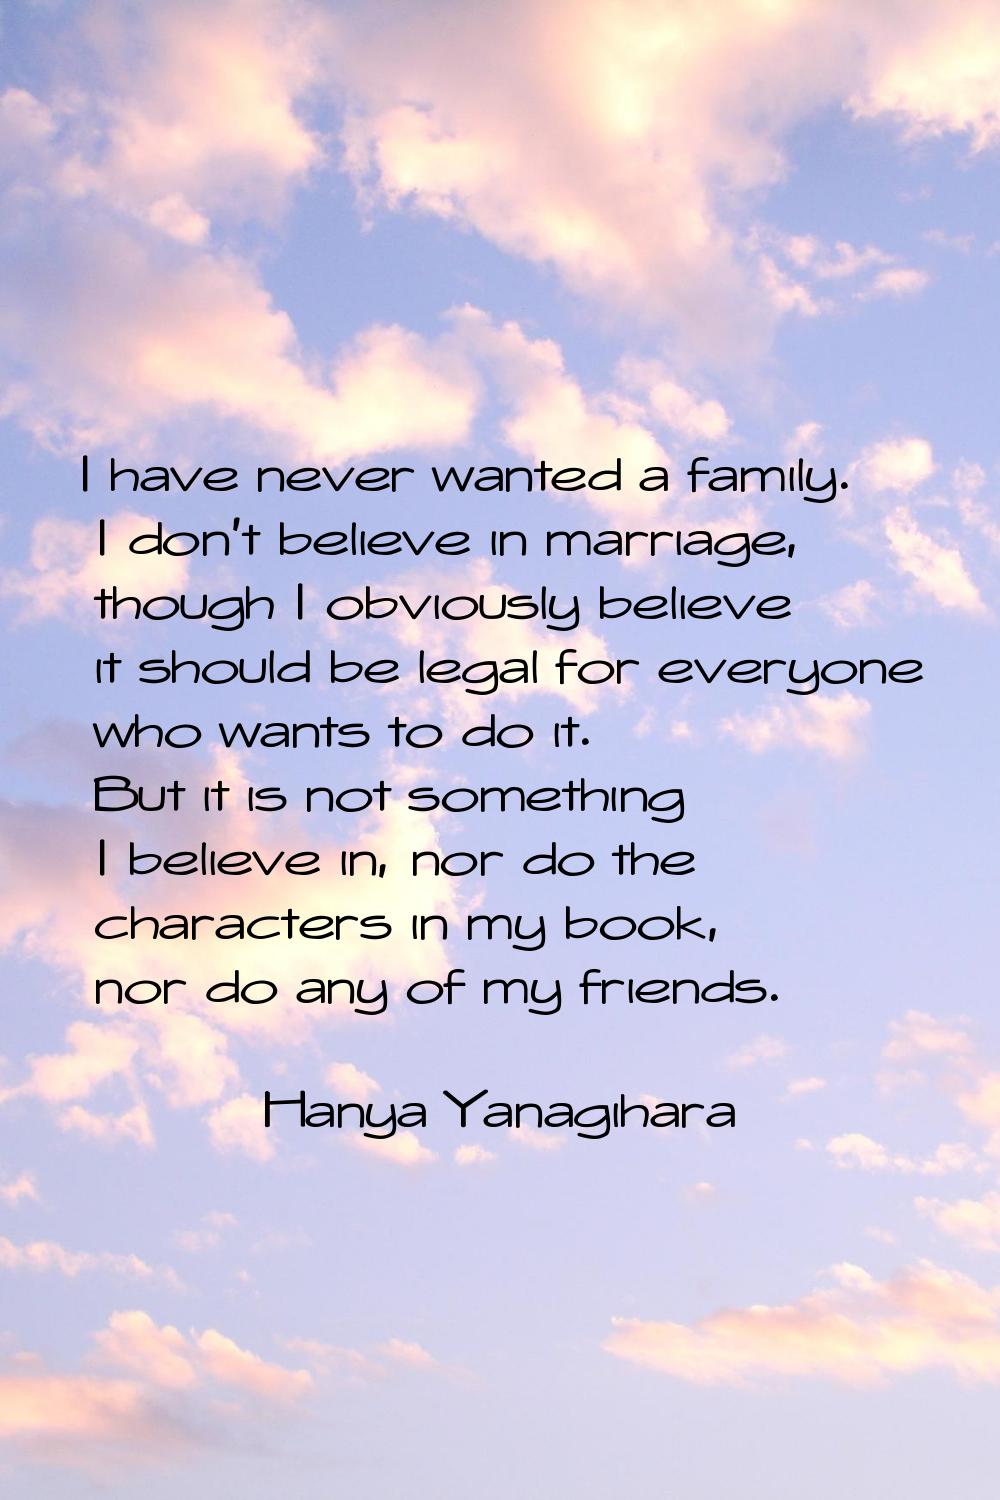 I have never wanted a family. I don't believe in marriage, though I obviously believe it should be 